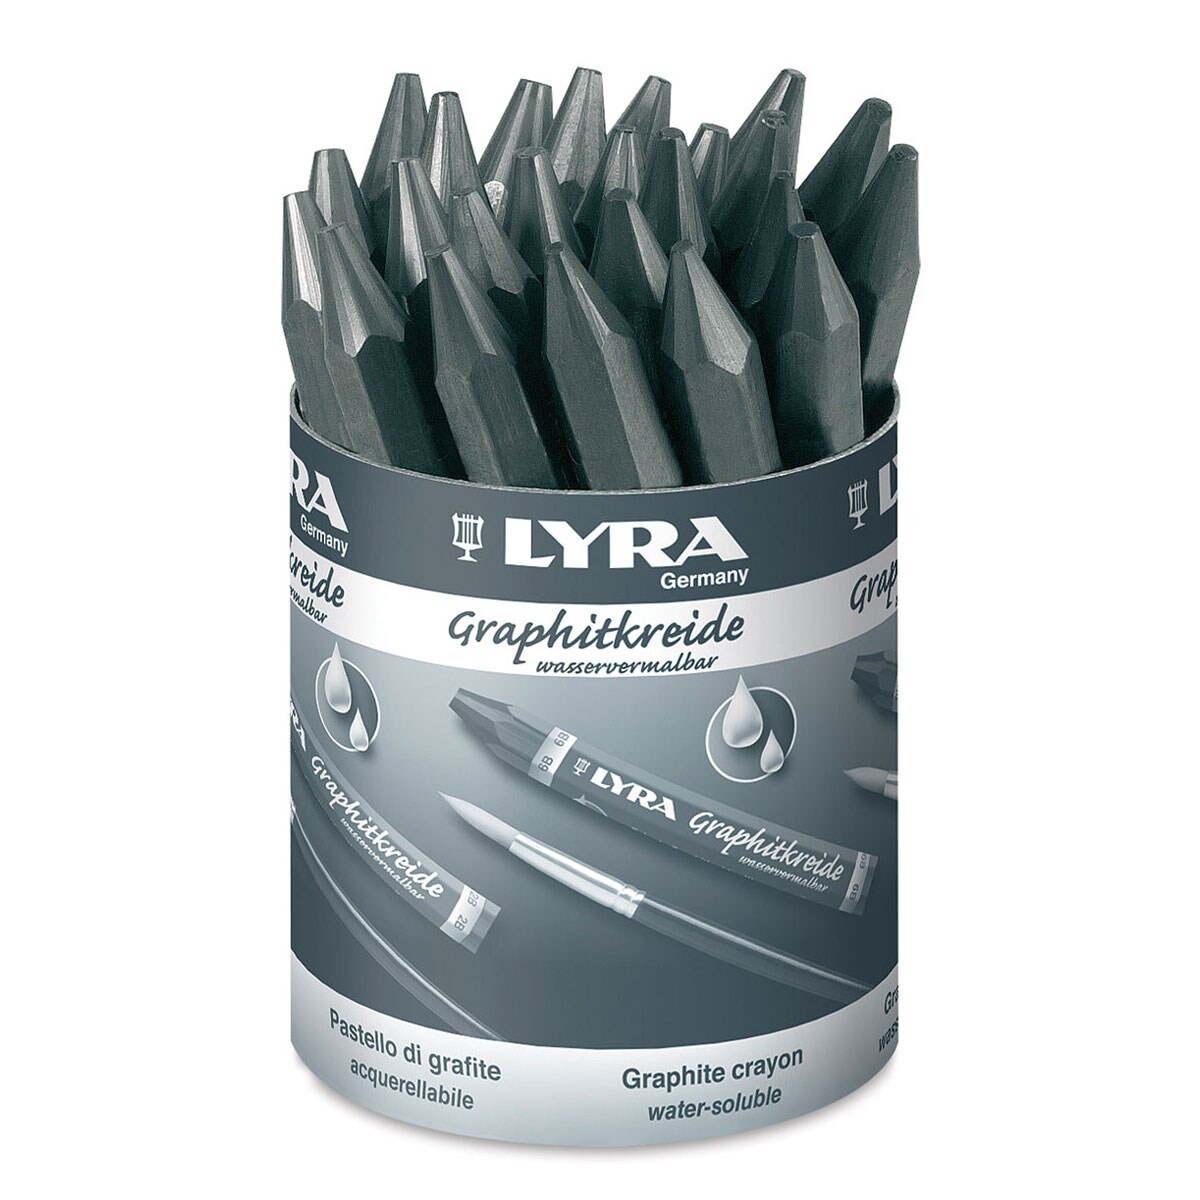 Lyra Watersoluble Graphite Crayon - Classroom Pack, Set of 24